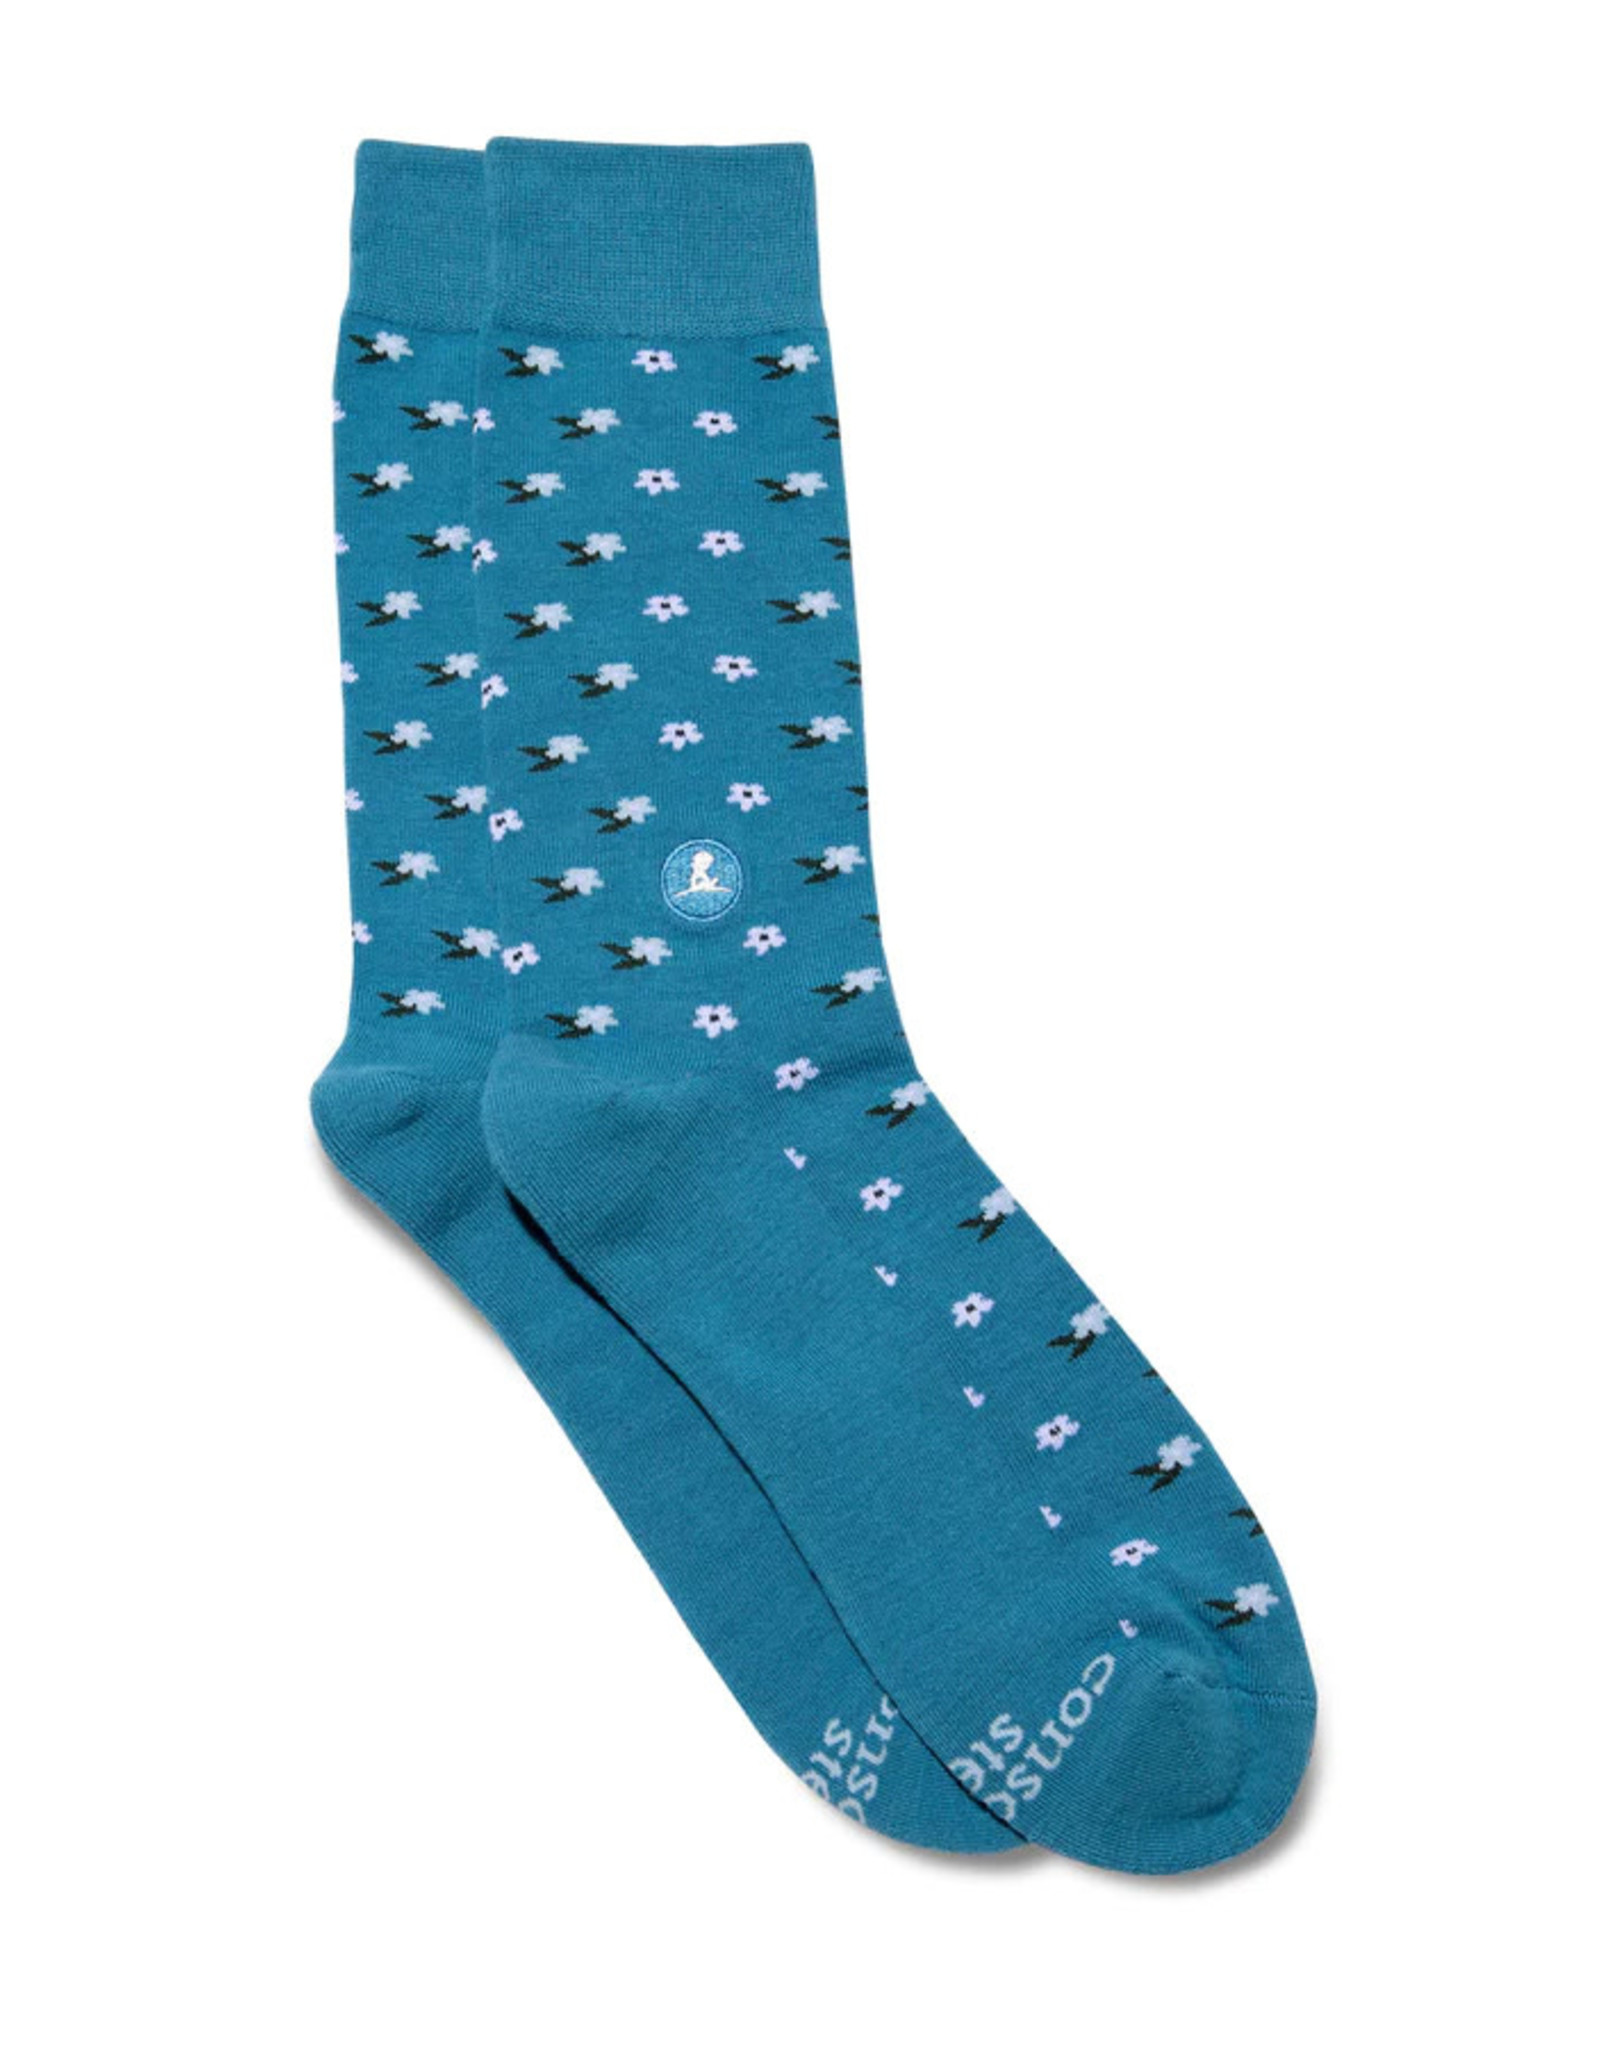 Conscious Step Socks that Find a Cure (Blue)